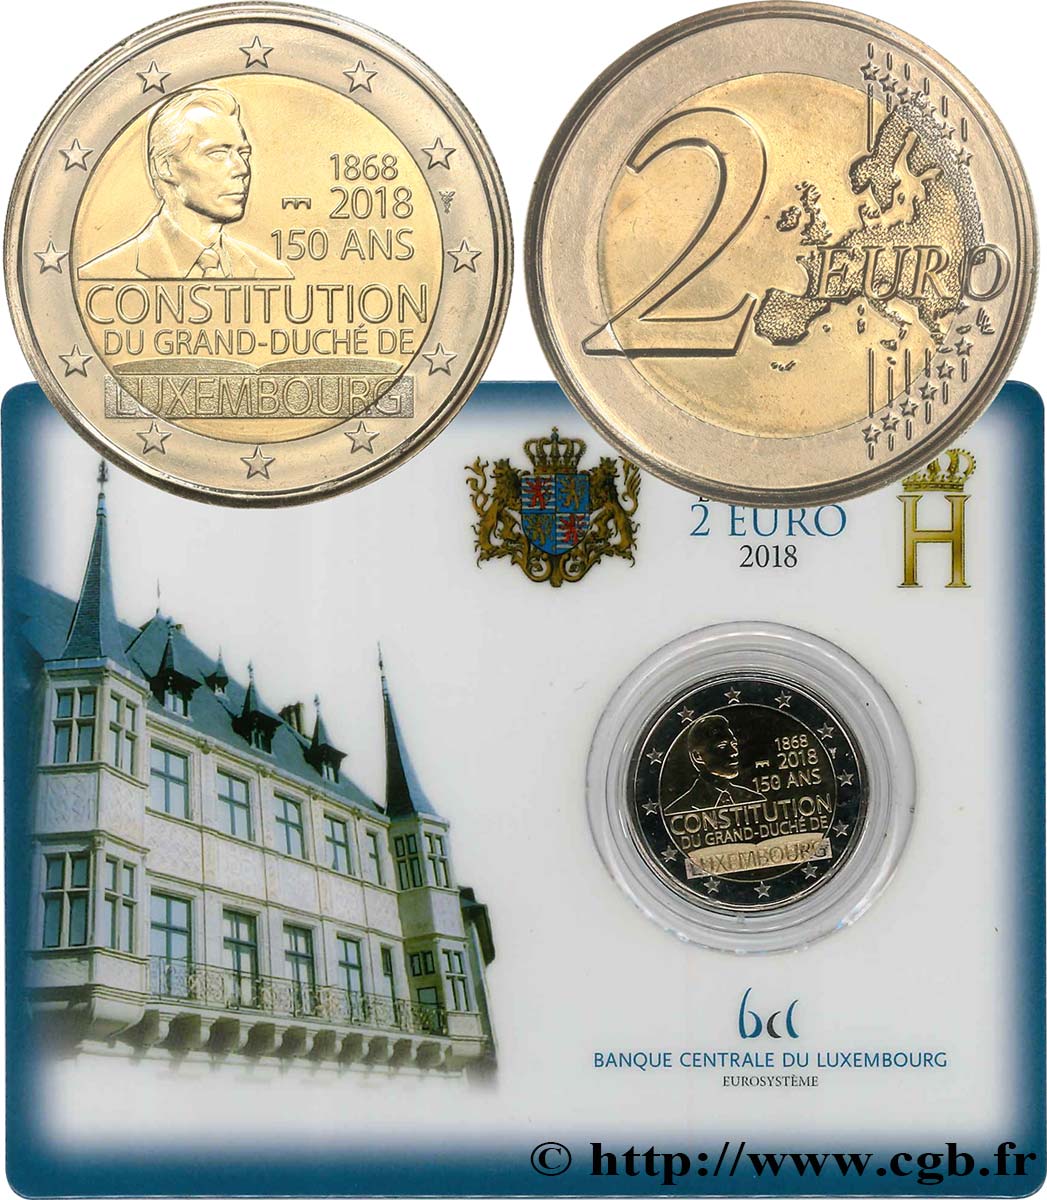 2 € euro commemorative coin 2018 Luxembourg Constitution 150 LUXEMBOURG